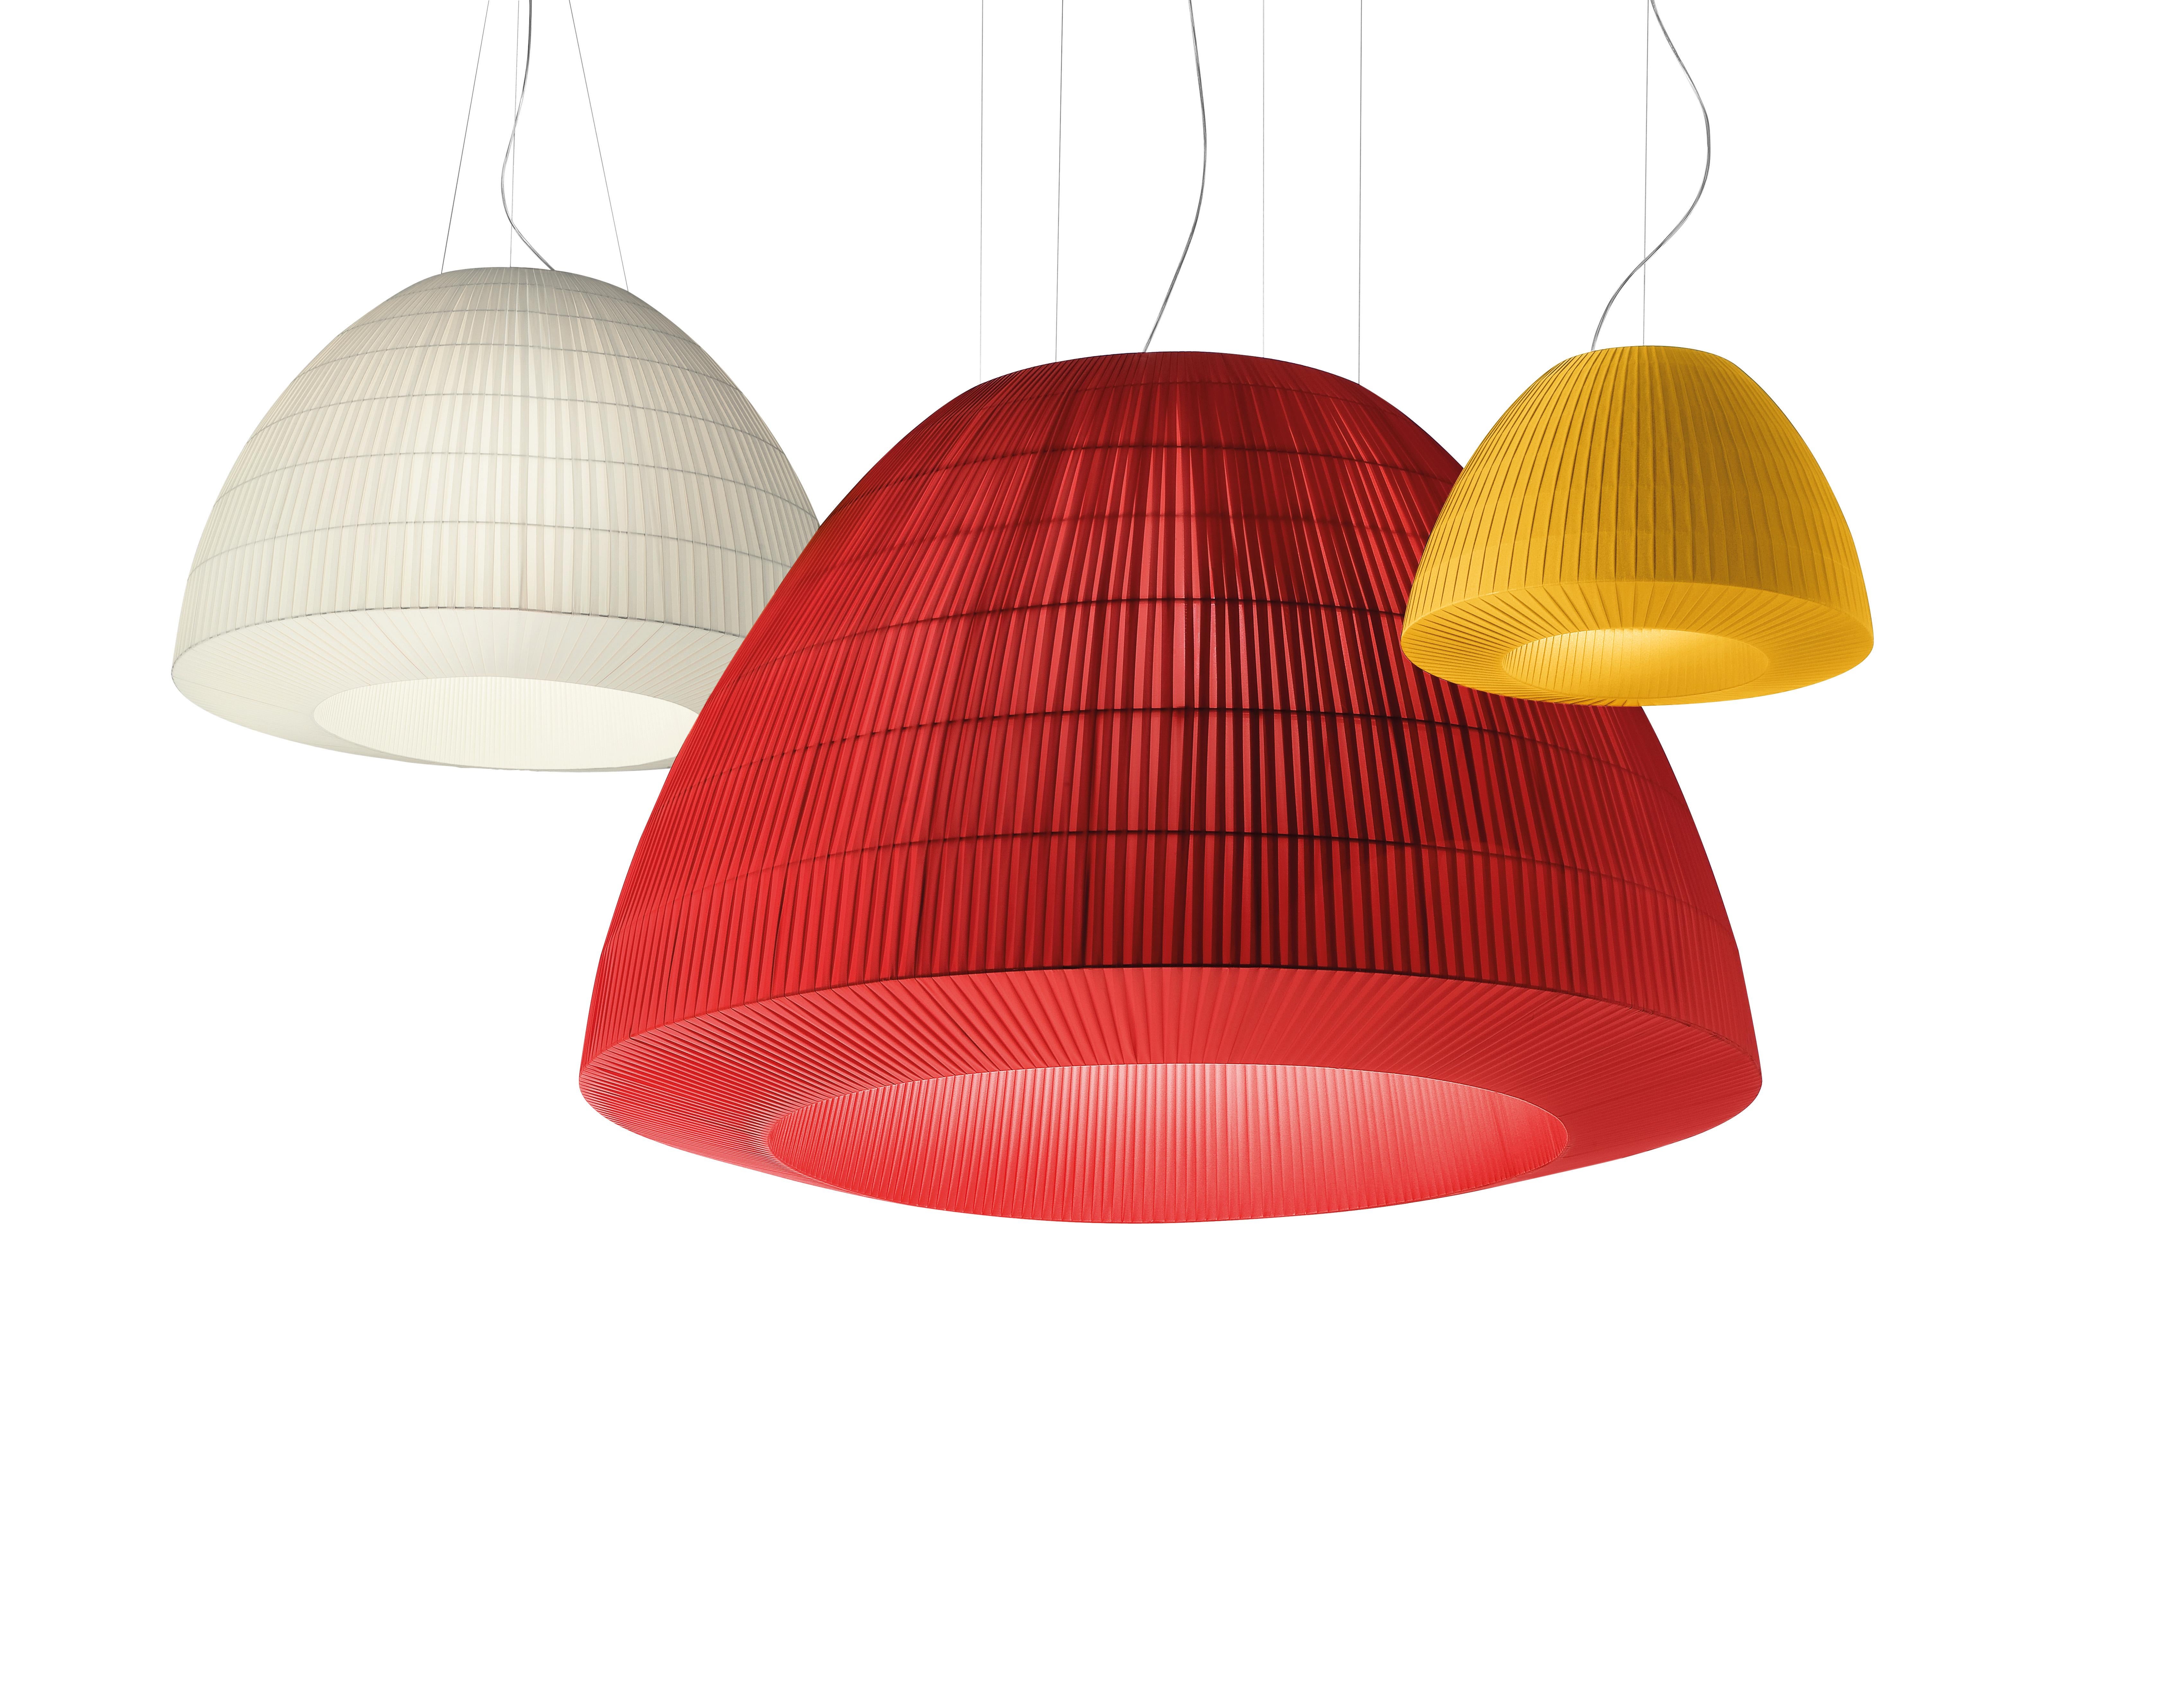 Axolight Bell Medium Pendant Lamp in White by Manuel & Vanessa Vivian

The ceiling version of Bell is in continuity with the aesthetic of the pendant one. The lightness given by the fabric, the multidimensionality and the chromatic variations remain